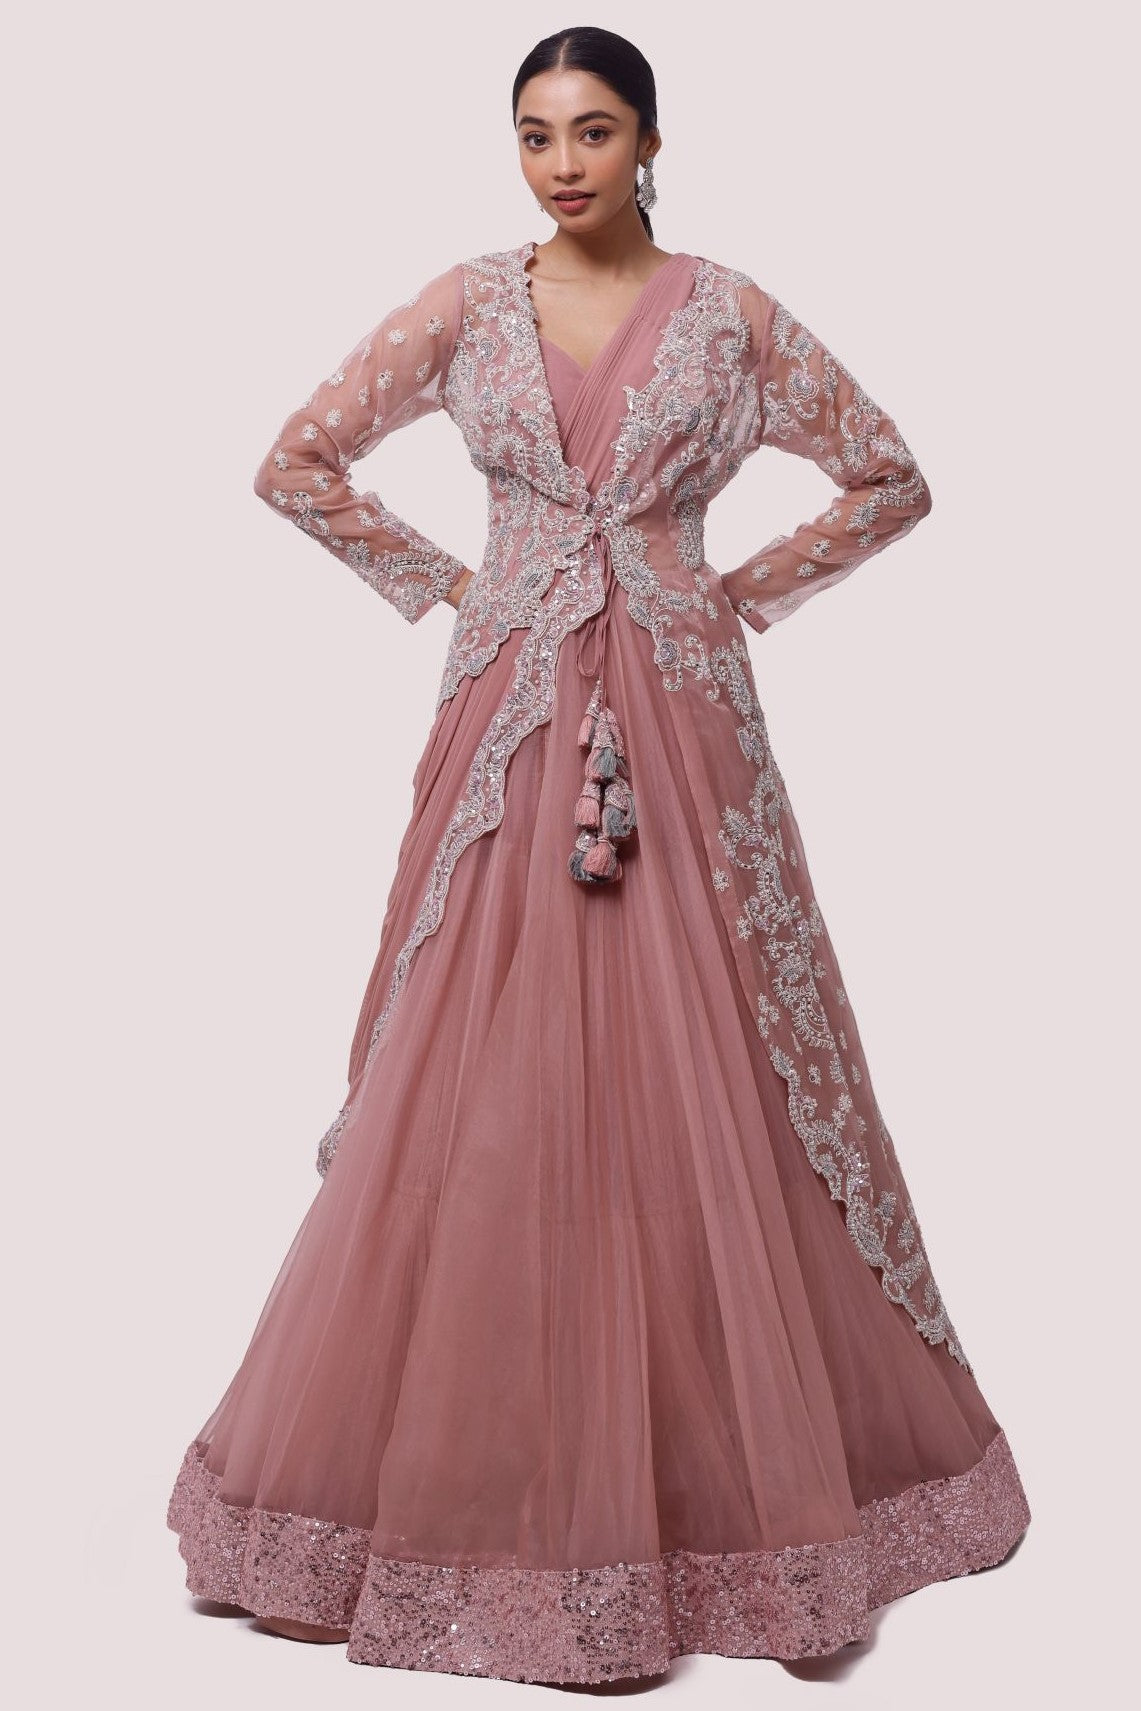 Buy beautiful dusty rose pink organza saree gown online in USA. Shop the best and latest designs in embroidered sarees, designer sarees, Anarkali suit, lehengas, sharara suits for weddings and special occasions from Pure Elegance Indian fashion store in USA.-full view